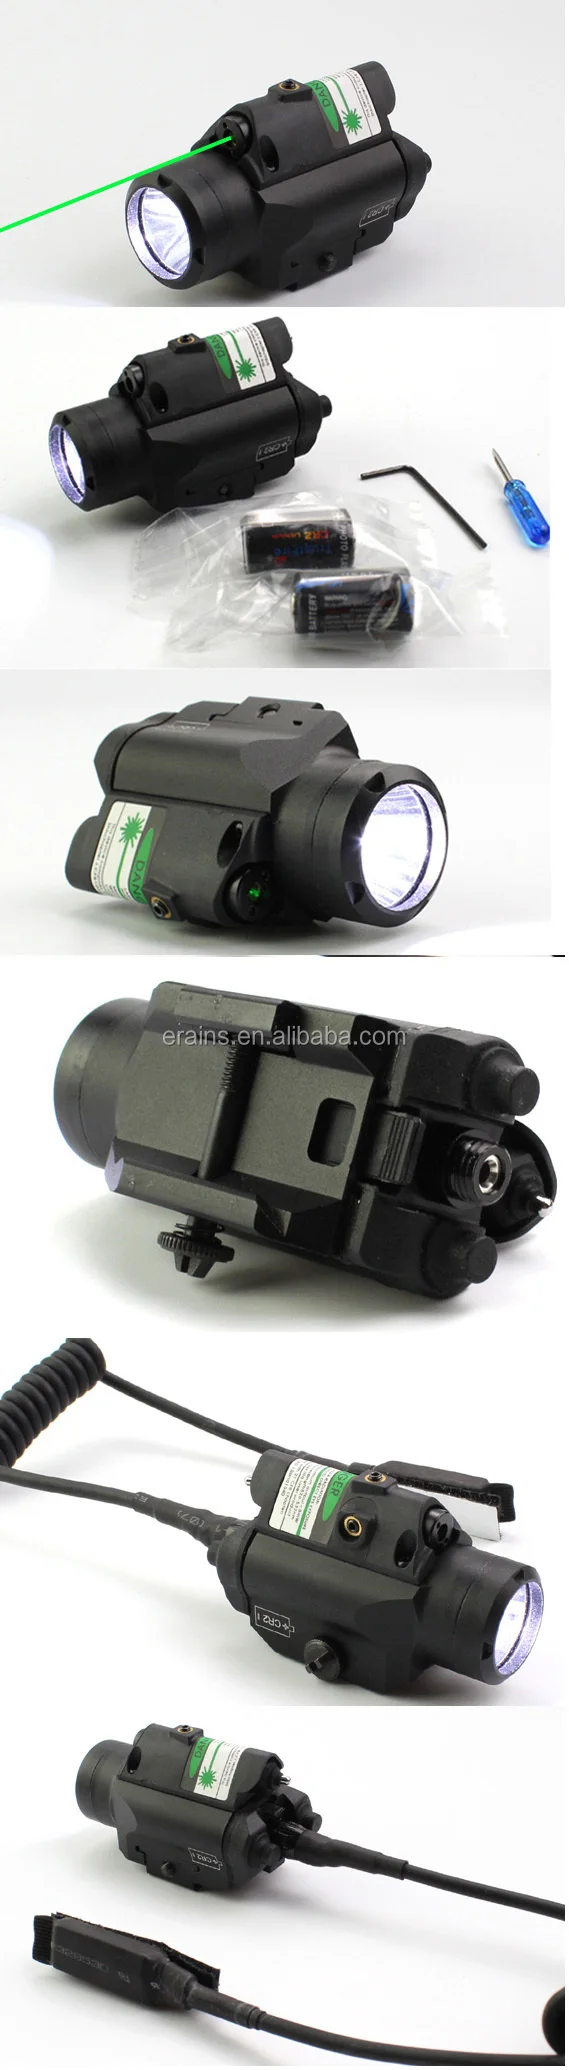 ES-LS-2HY02G tactical led light with green laser full parts and with pressure pad switch.jpg